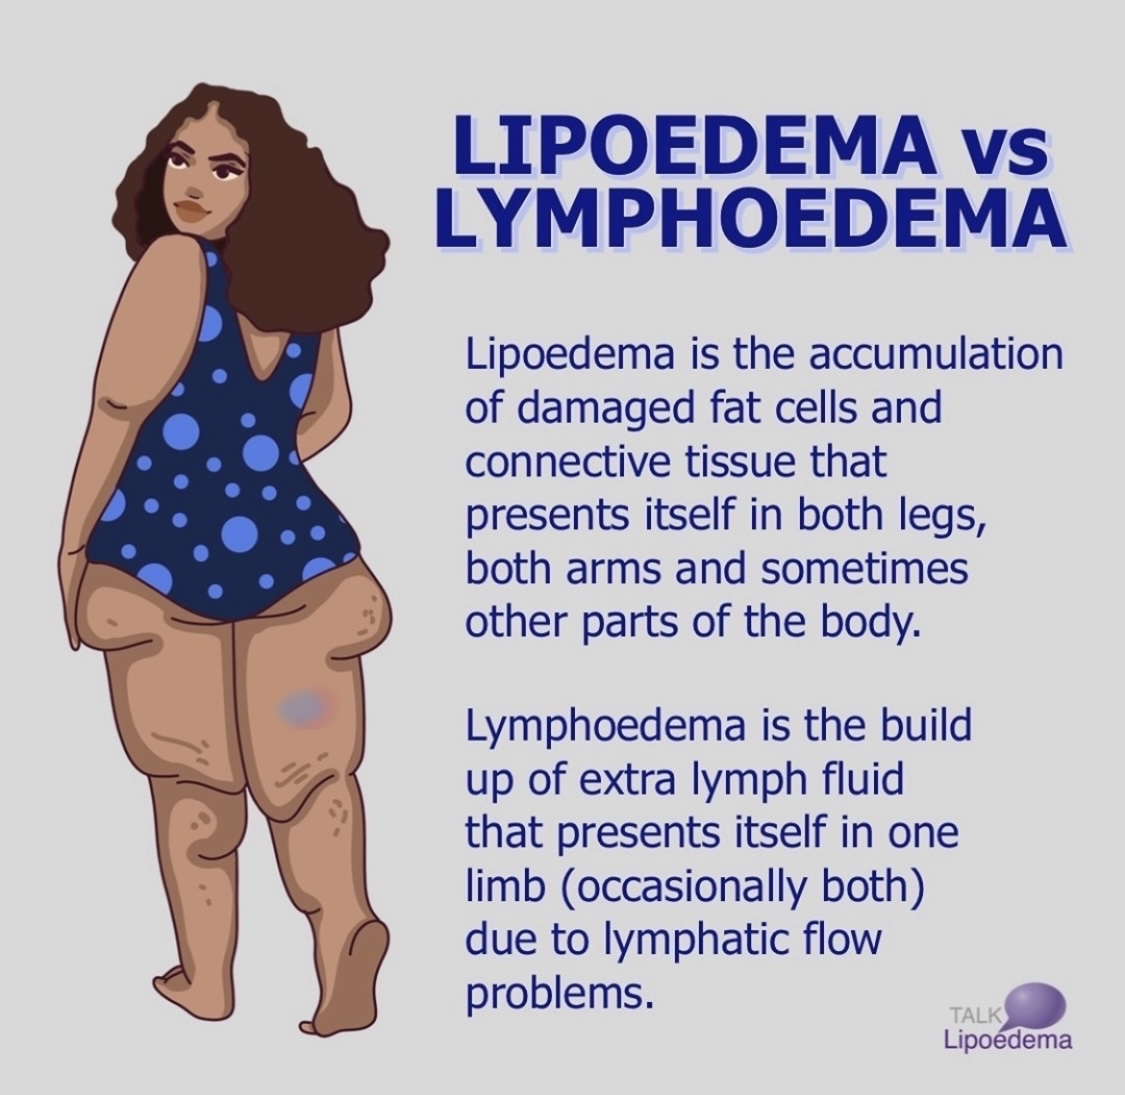 TalkLipoedema on X: Later stage #Lipoedema patients can suffer with  #lipolymphoedema which means you get swelling of limbs too. With the  assistance of compression garments you can alleviate symptoms  #talklipoedema #lipoedema #lipedema #